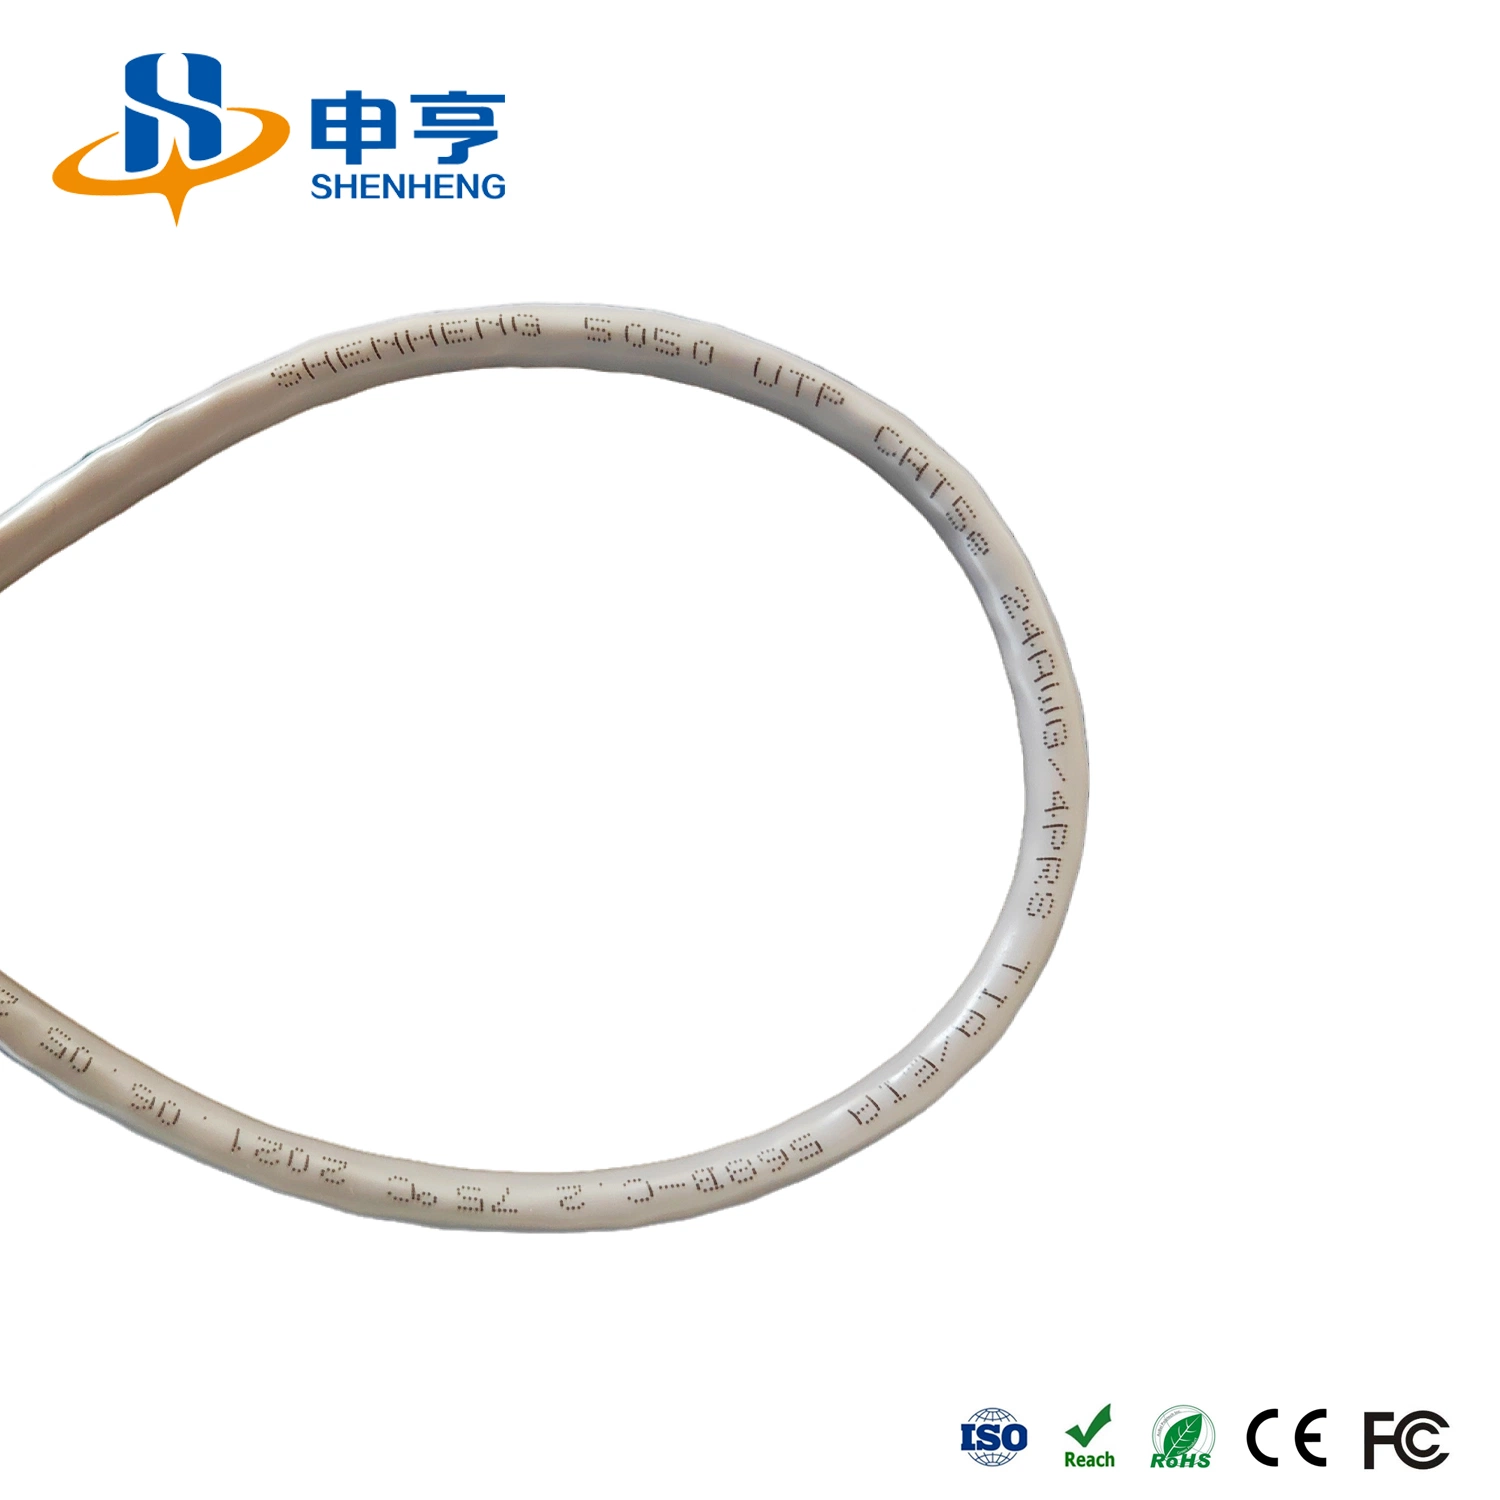 Network Products PVC/LSZH Network Cable/LAN Cable UTP Cat5e Cable 24AWG, Copper Wire Data Cable Communication Cable Factory Price Cat5e Ethernet Network Cable